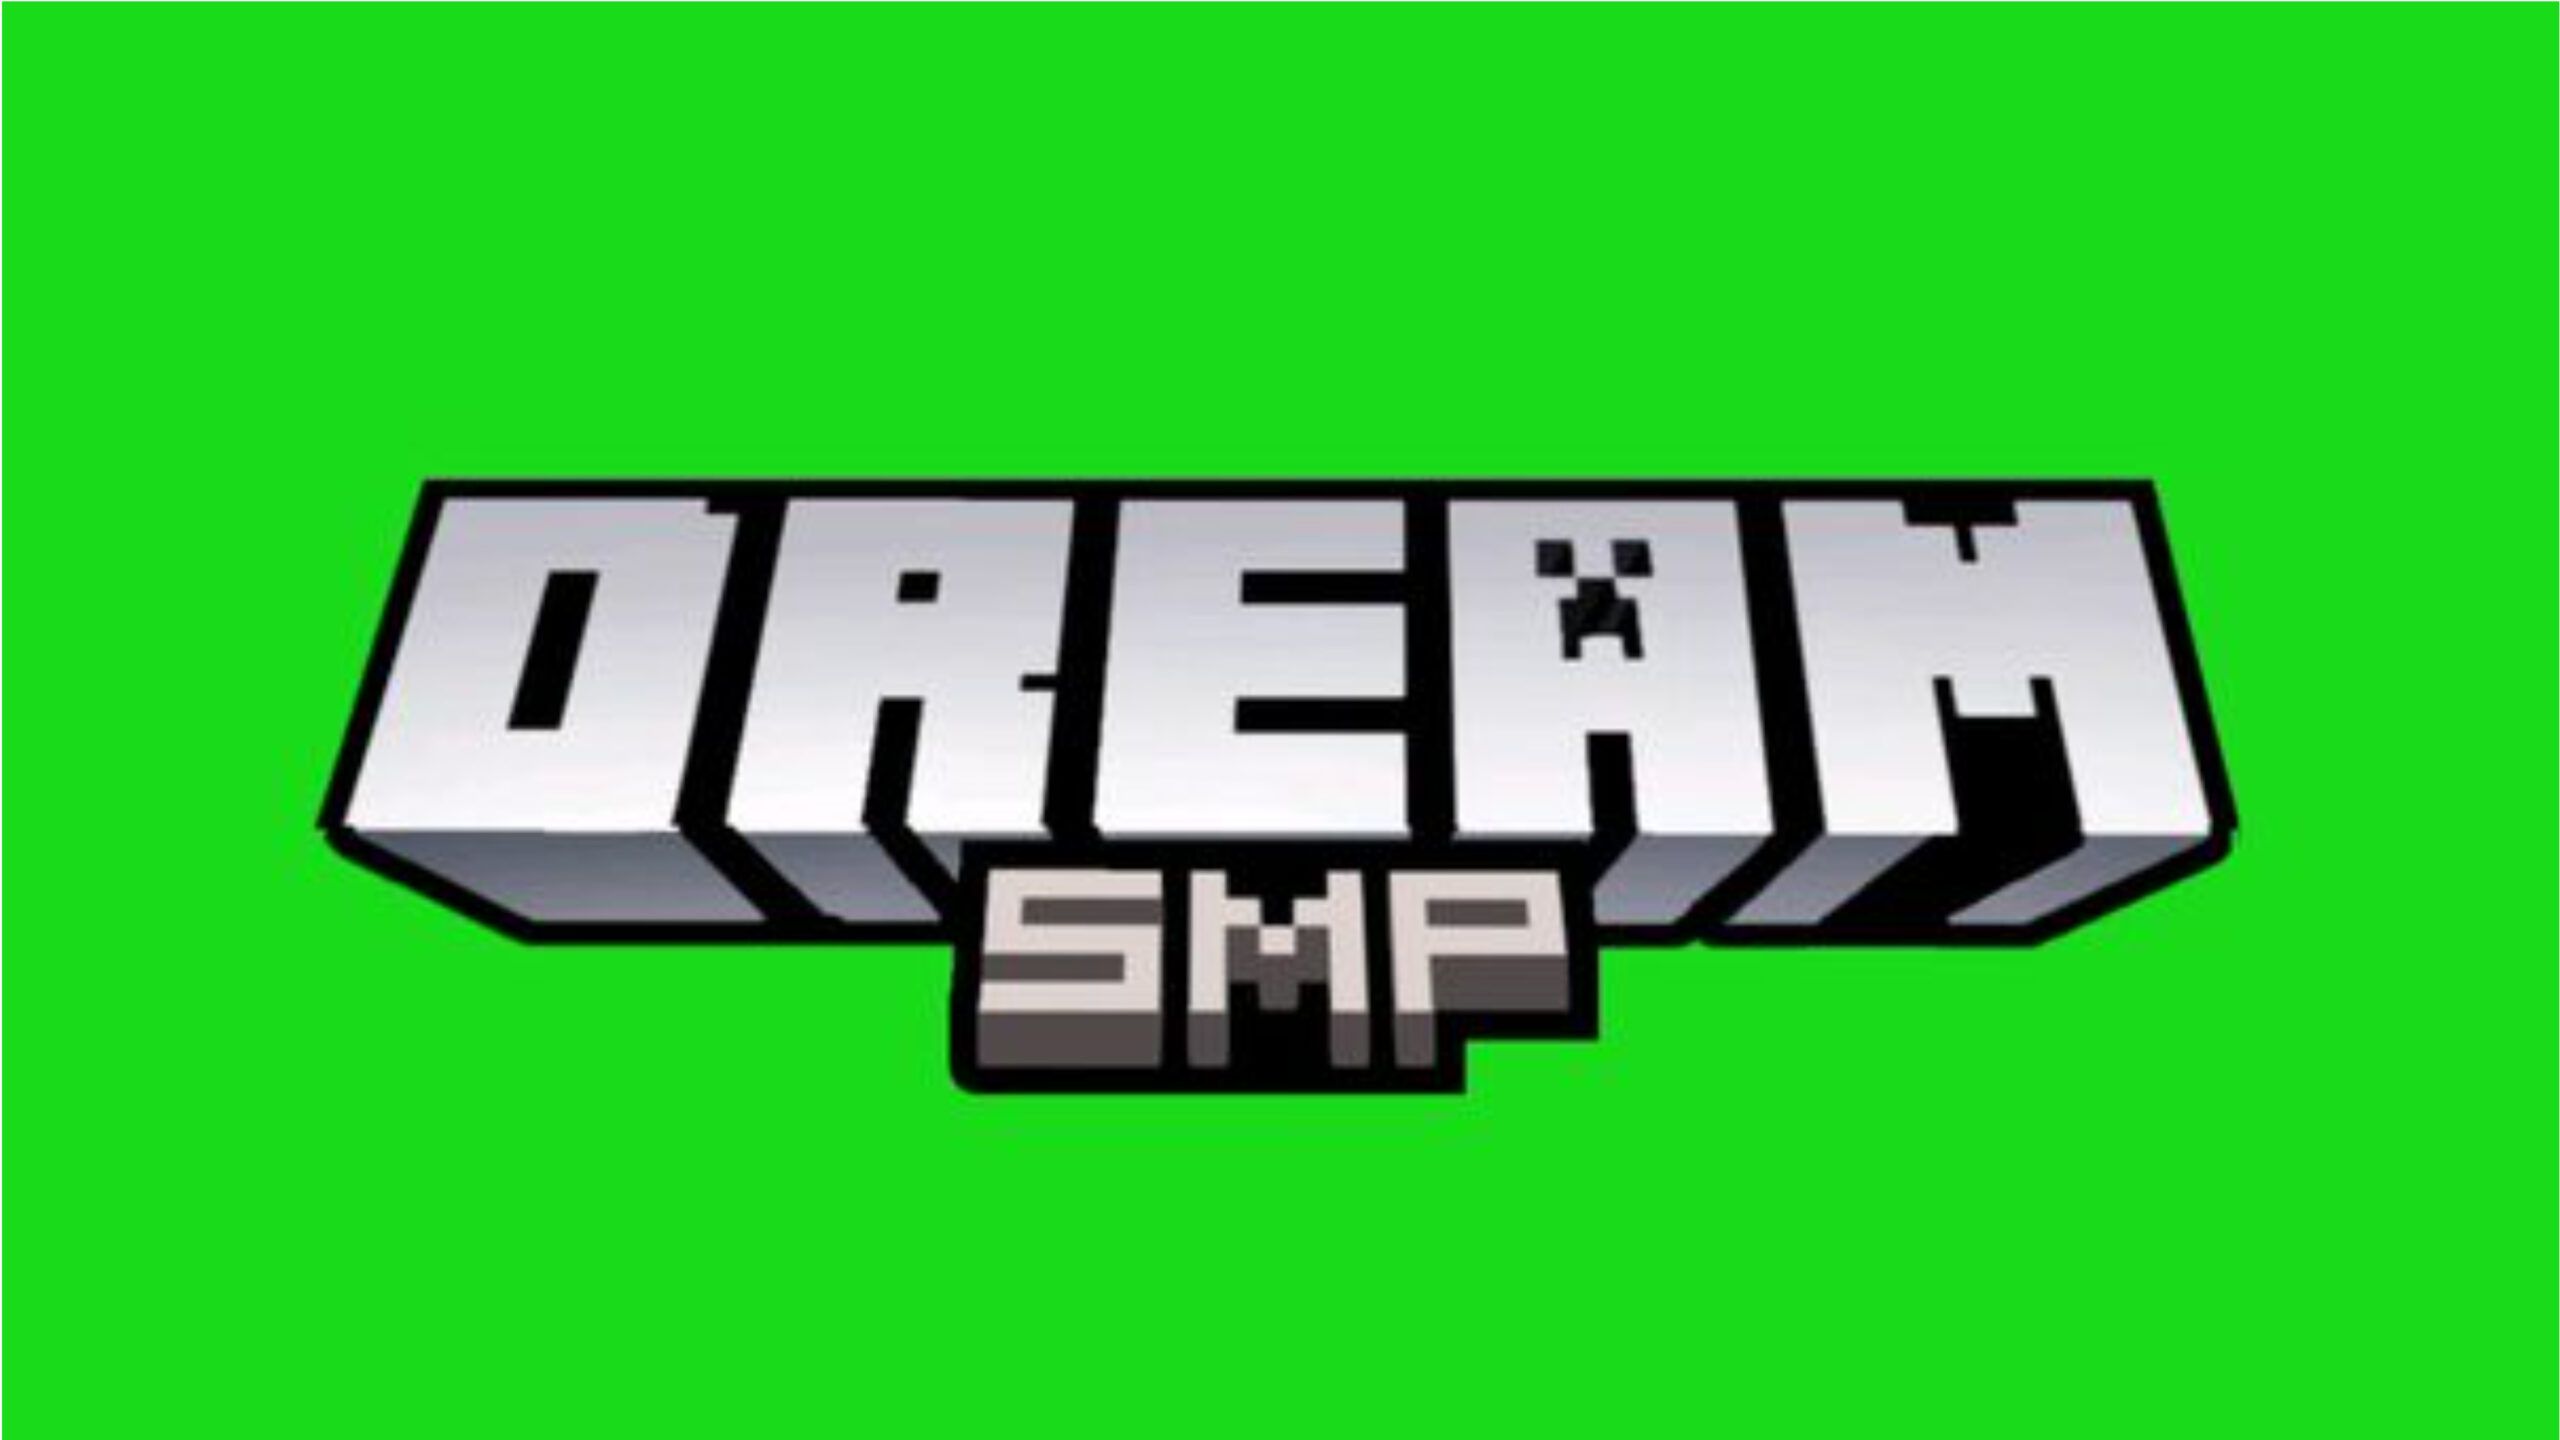 What Is Dream SMP Music Genre On Spotify Wrapped?